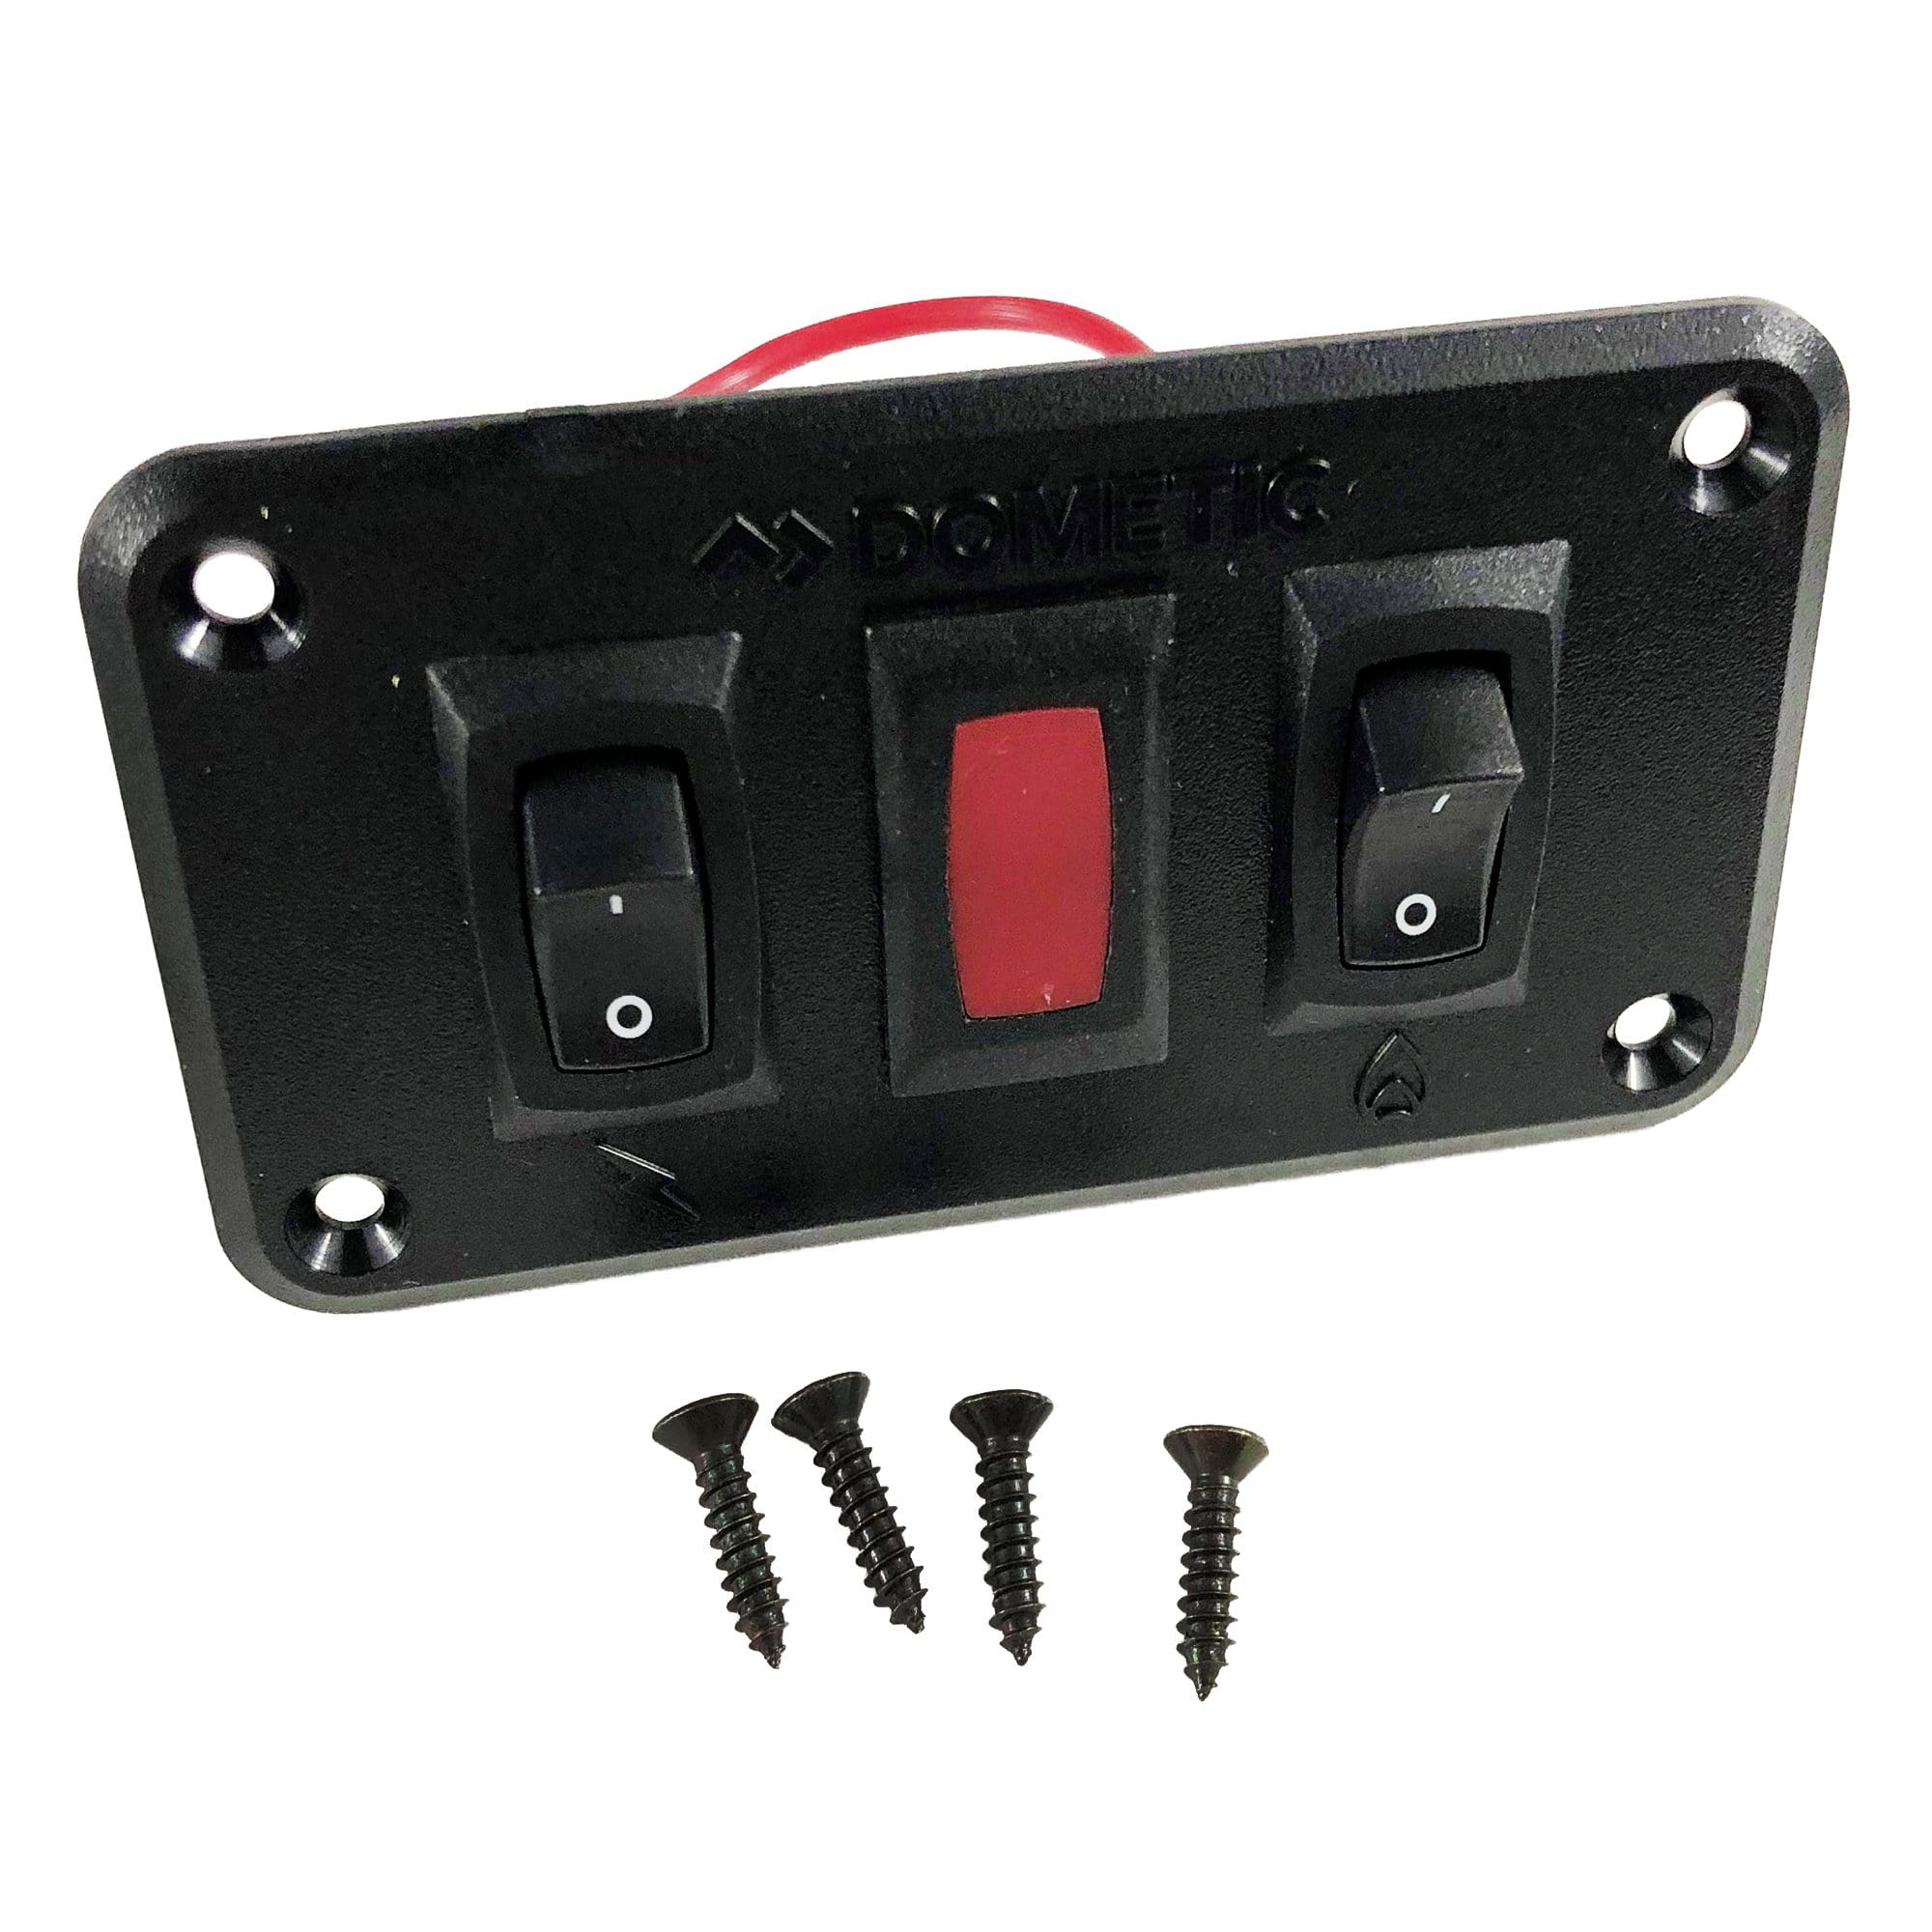 Dometic 91270 Water Heater Switch Kit, Dual Panel, 12 VDC, Black